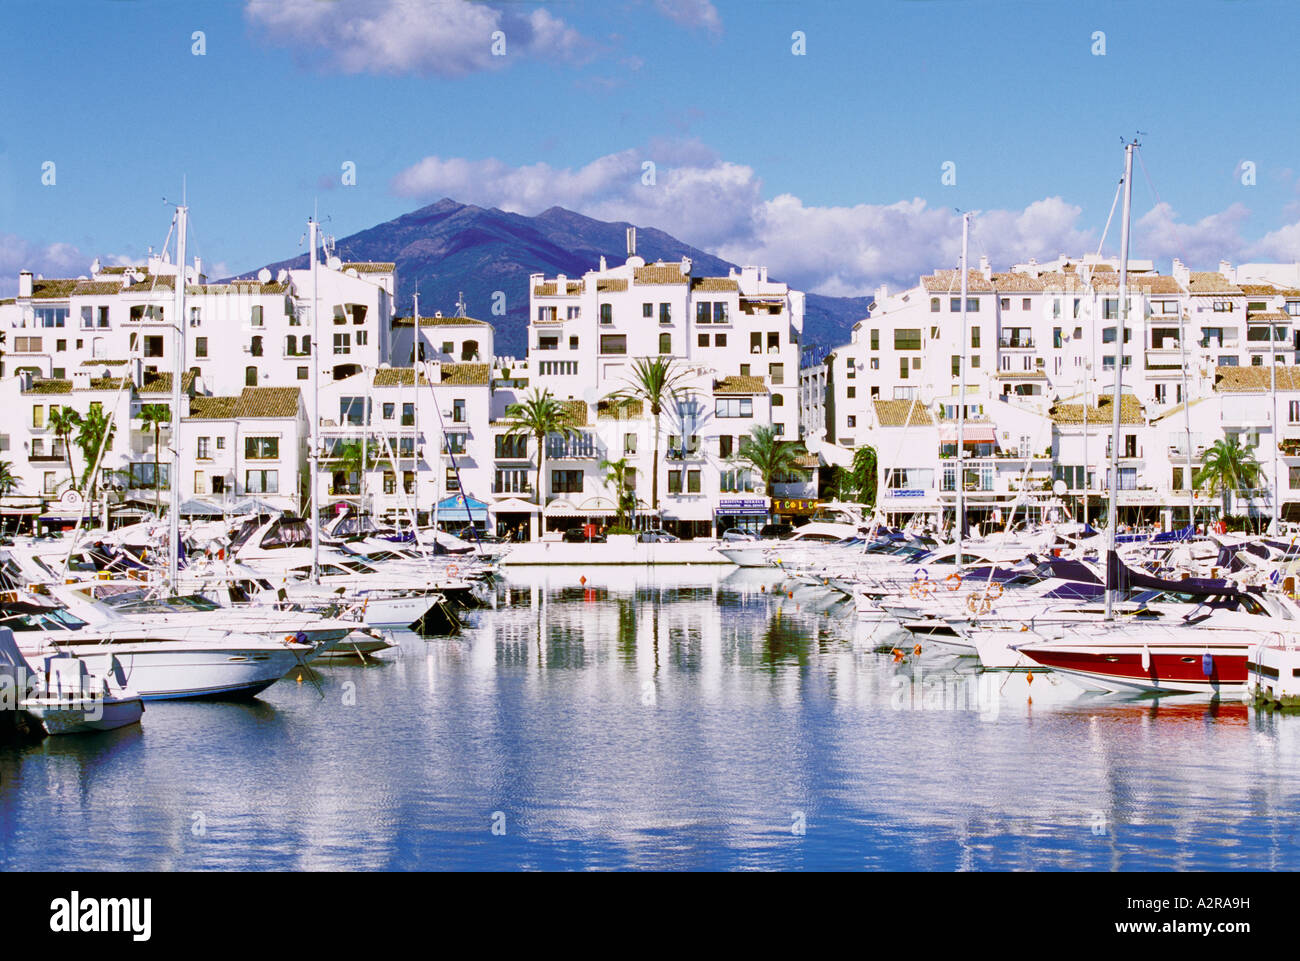 The marina and town at Puerto Banus Costa del Sol Spain Stock Photo - Alamy